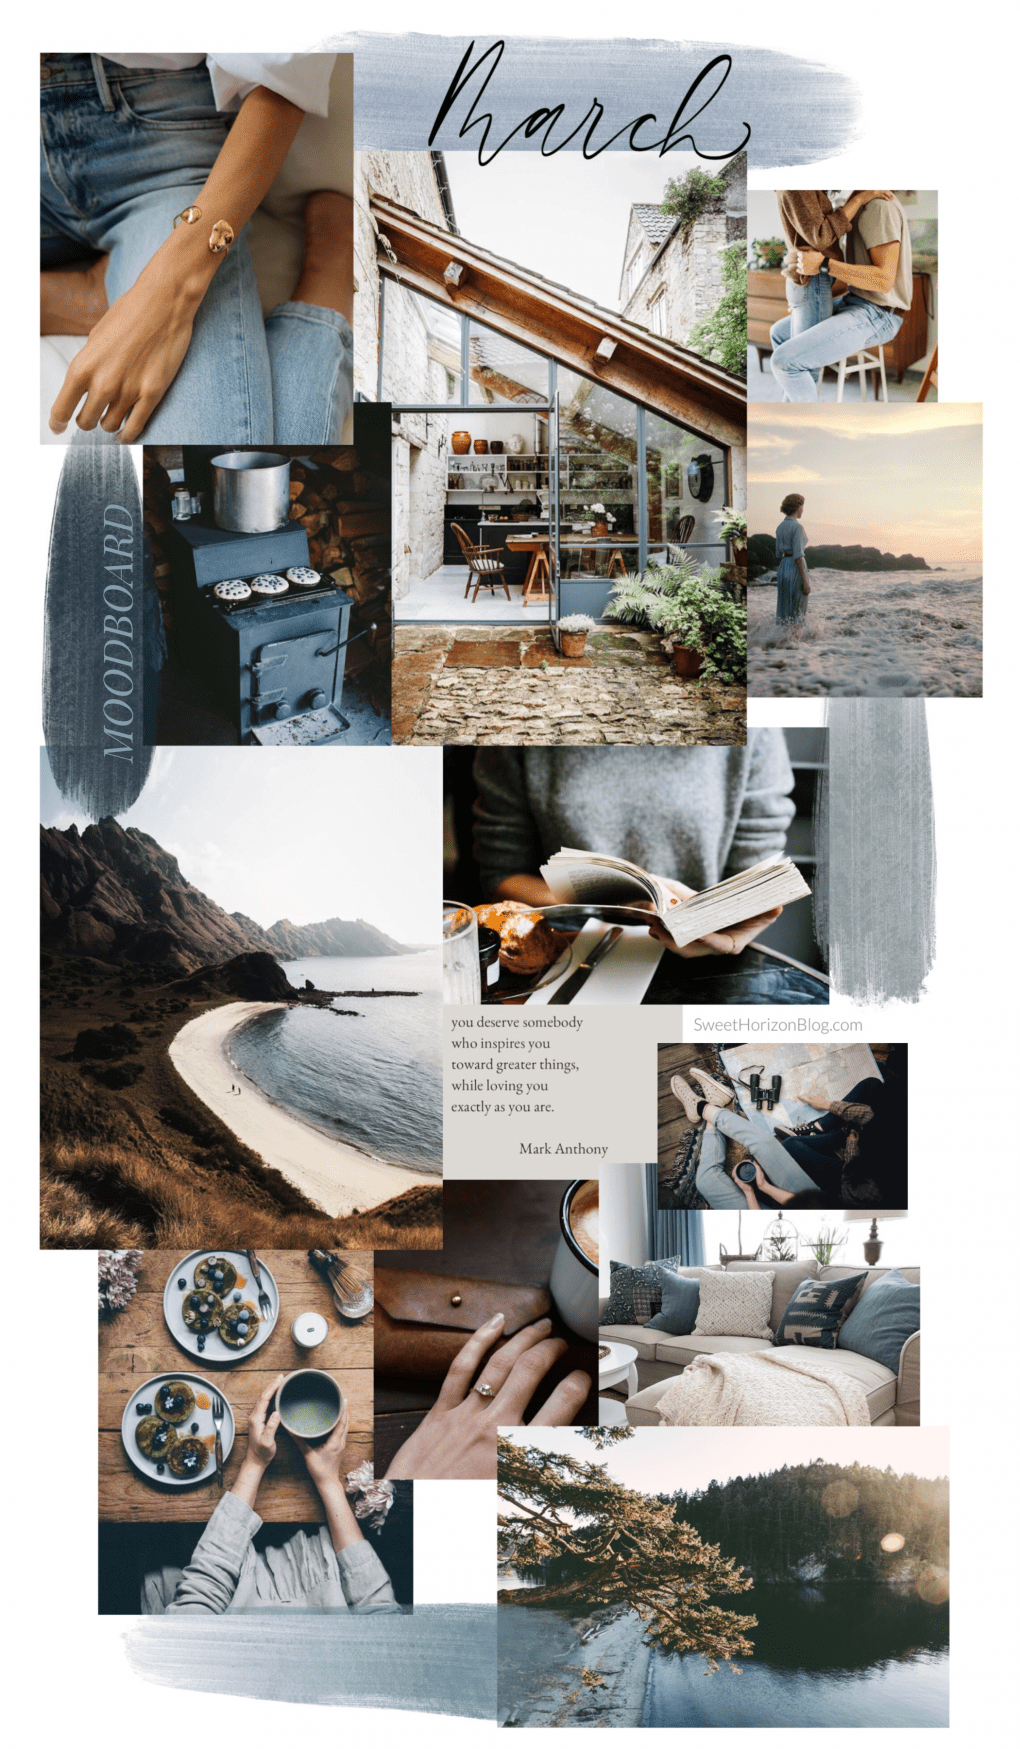 A collage of photos including coffee, nature, and a person sitting on a bench. - March